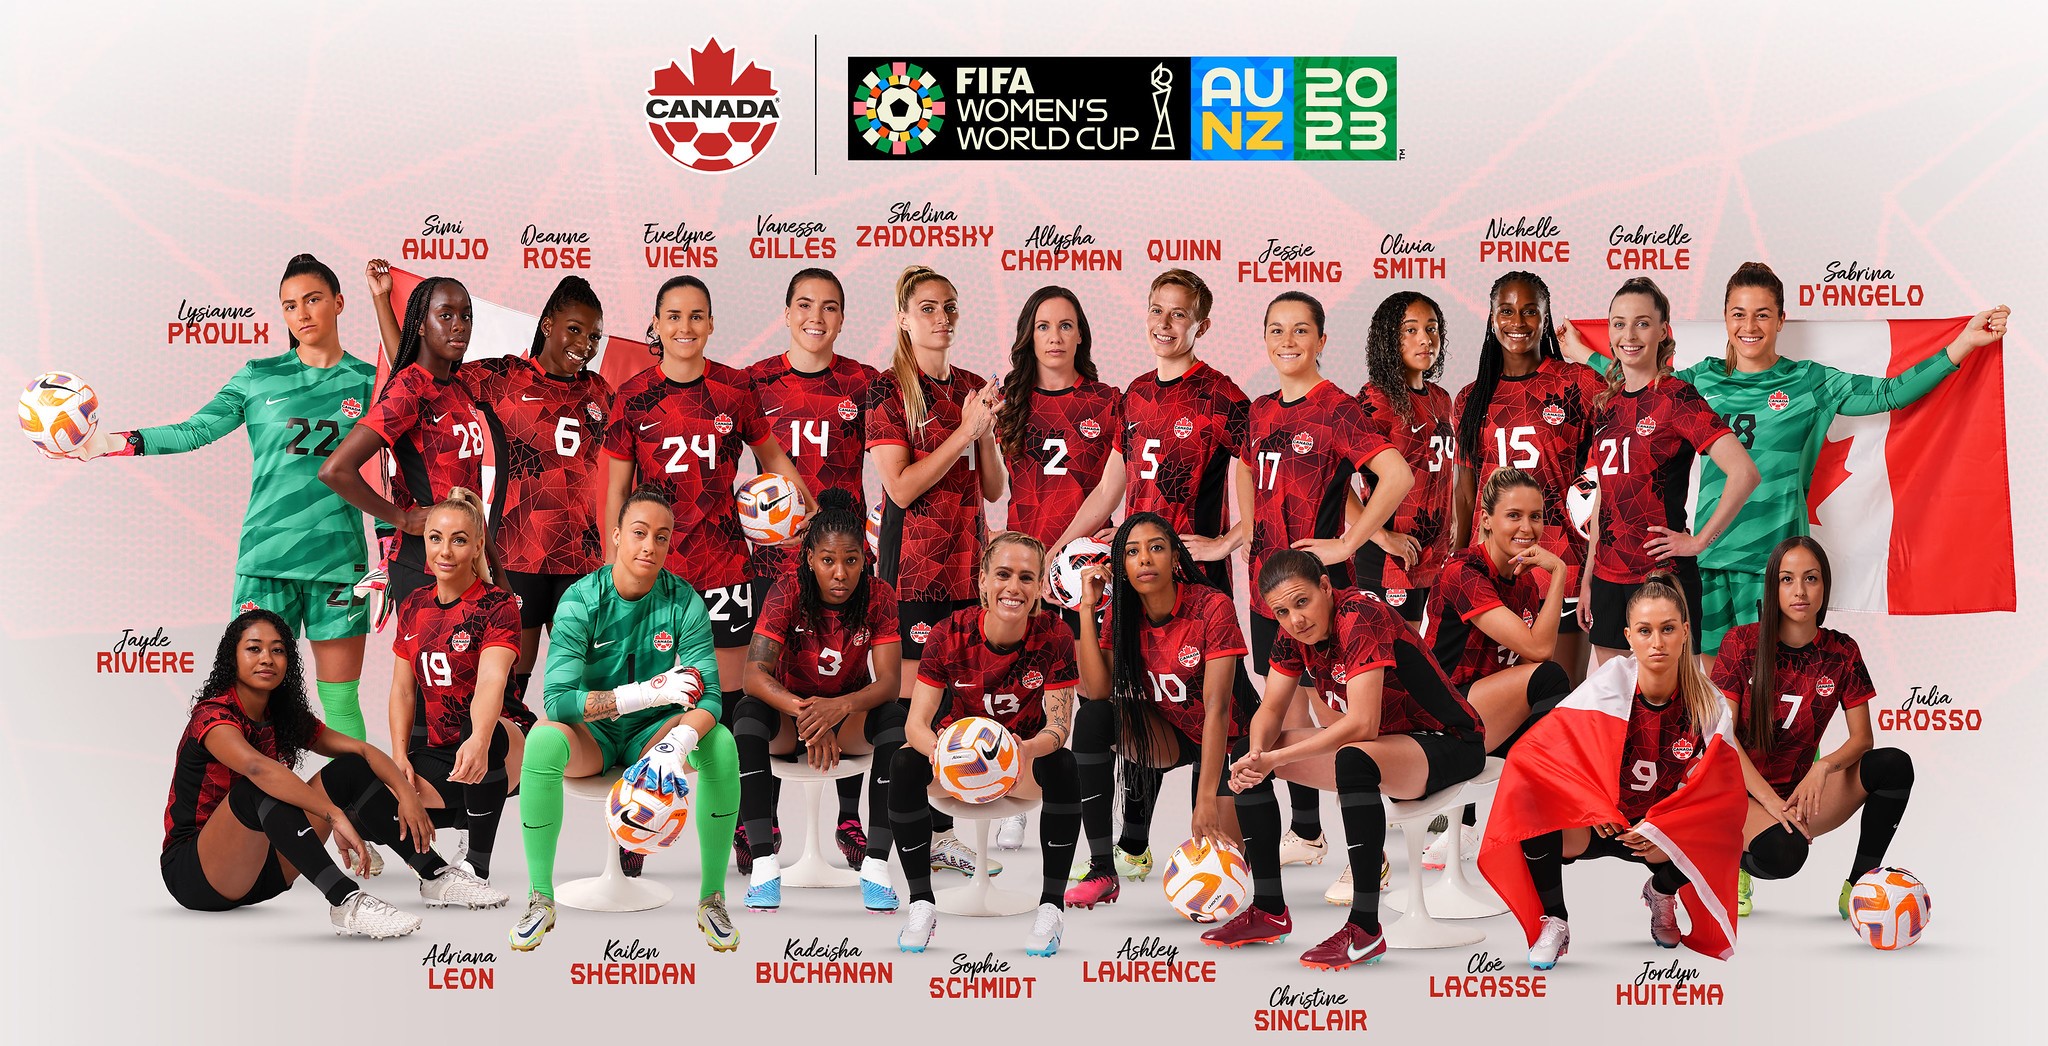 Canada has high hopes for Women's World Cup The Quebec Chronicle